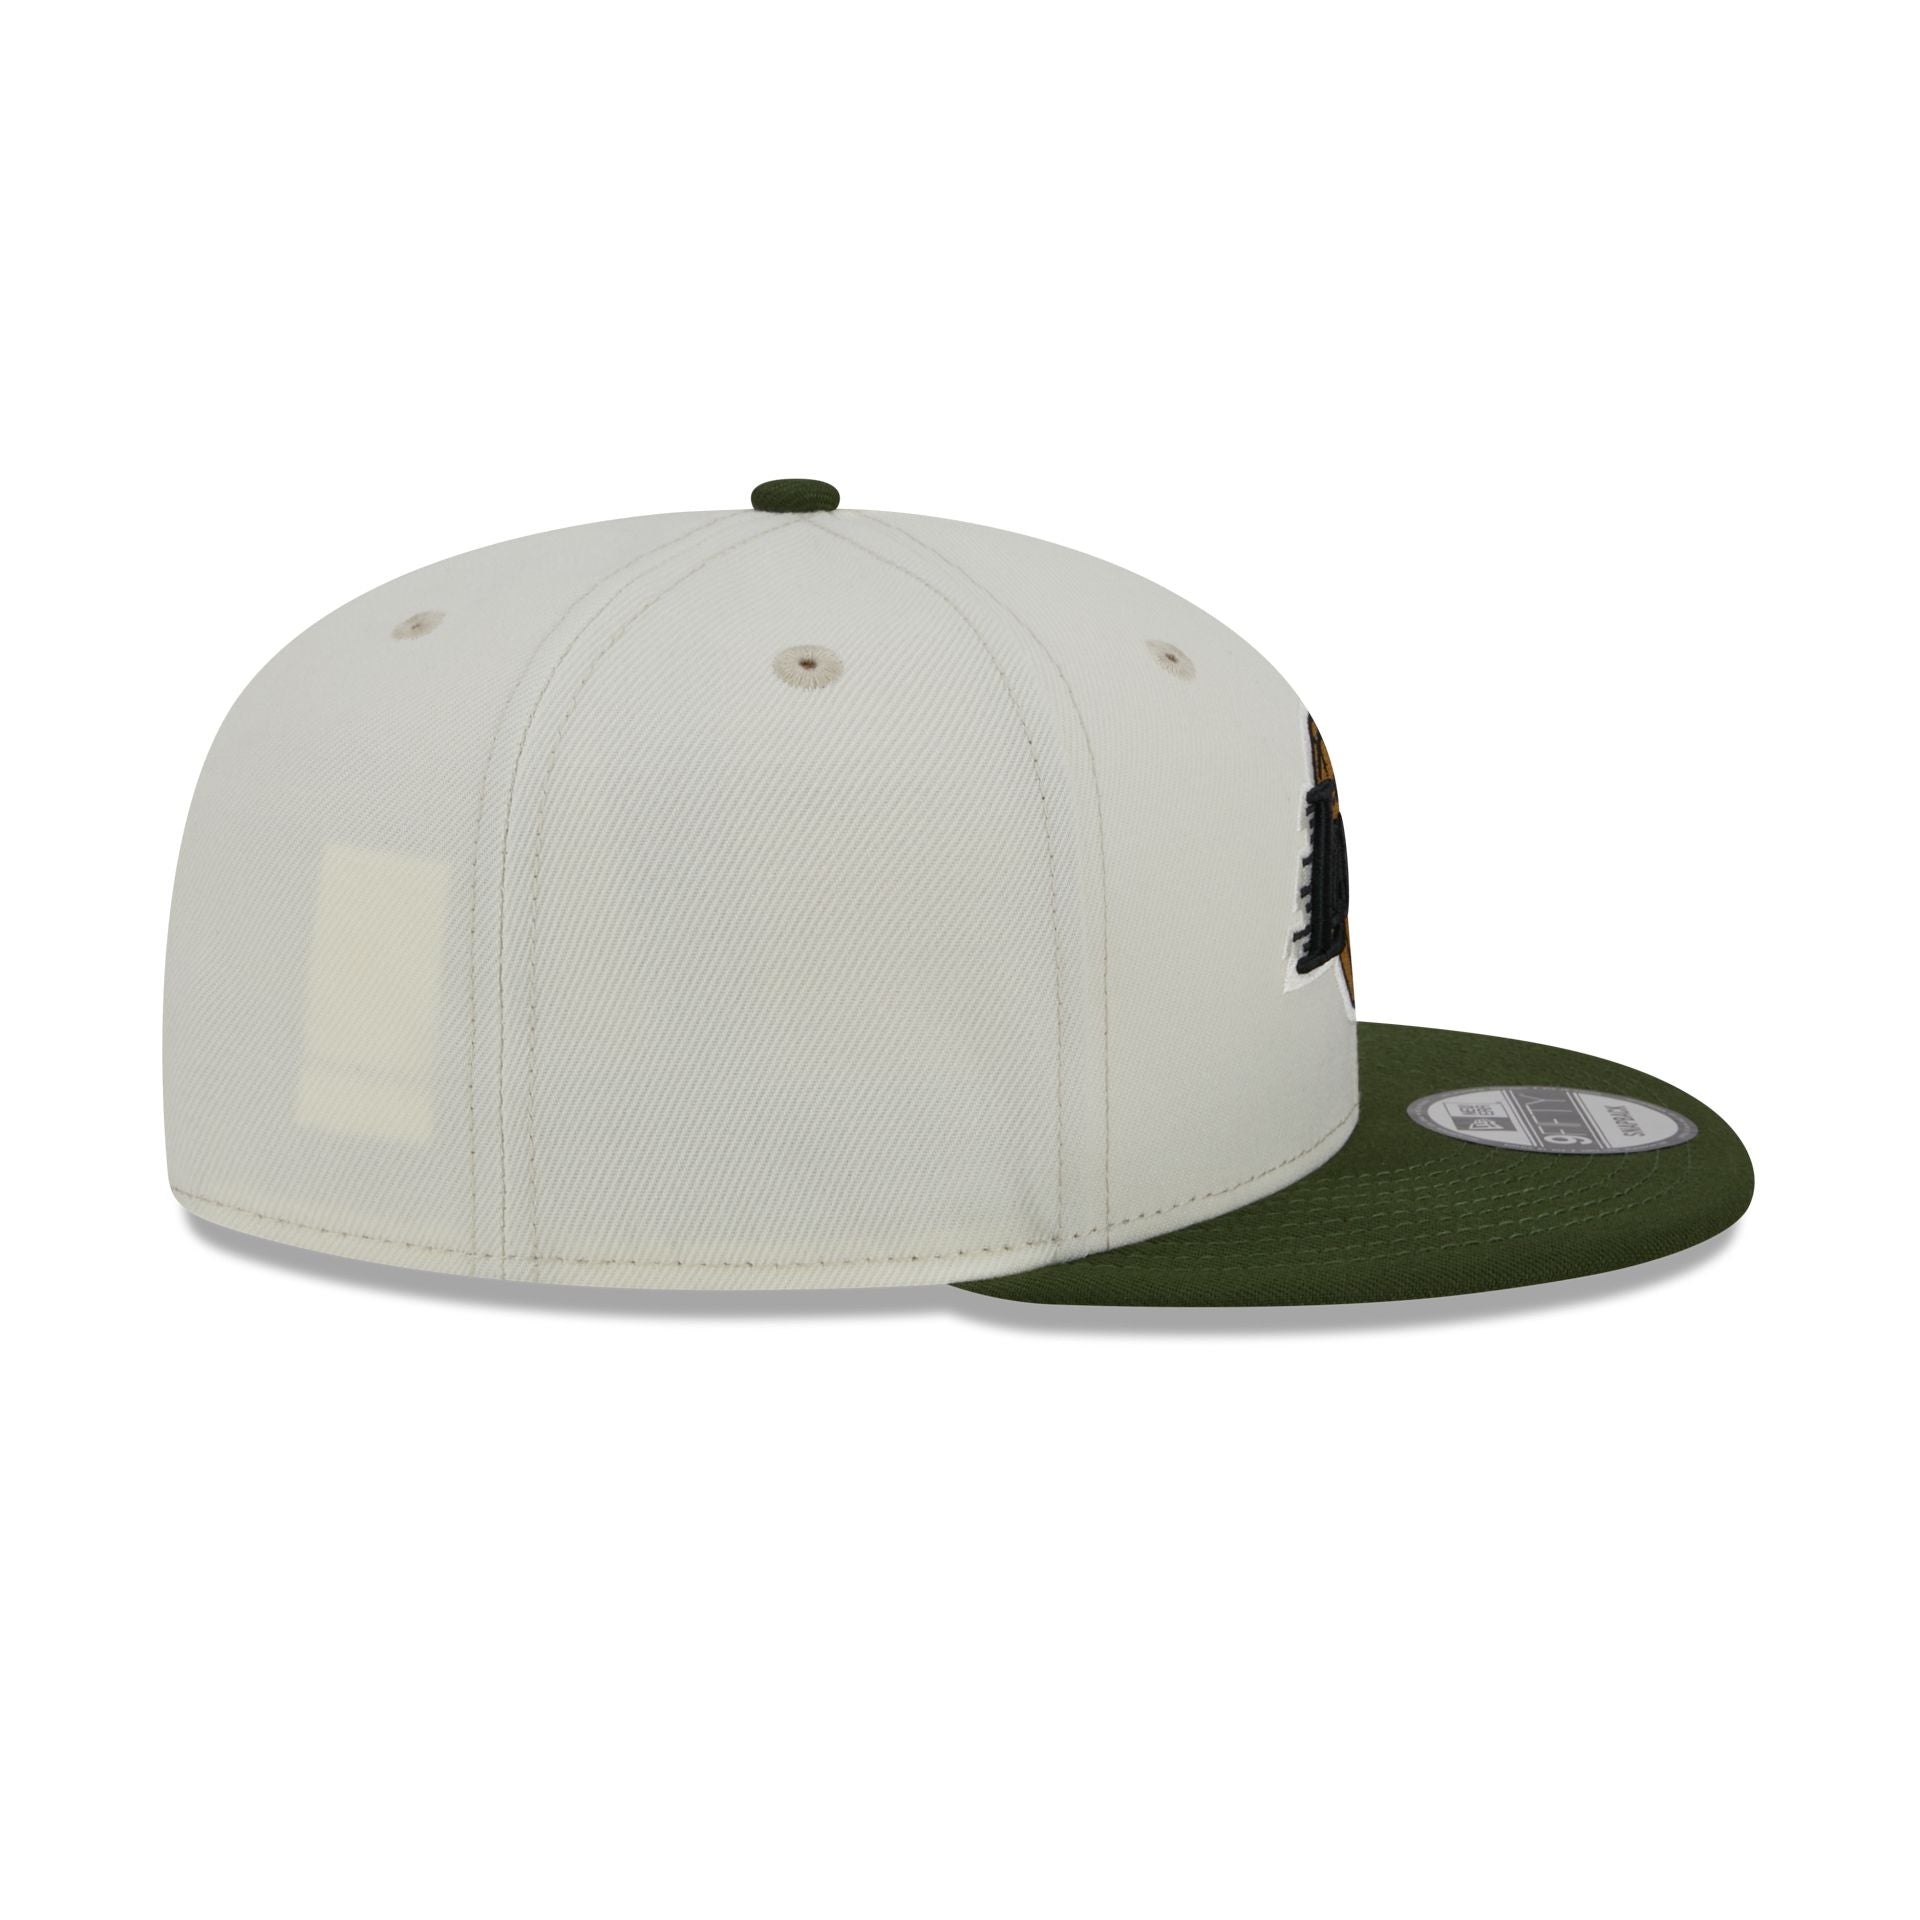 Los Angeles Lakers Emerald 9FIFTY Snapback